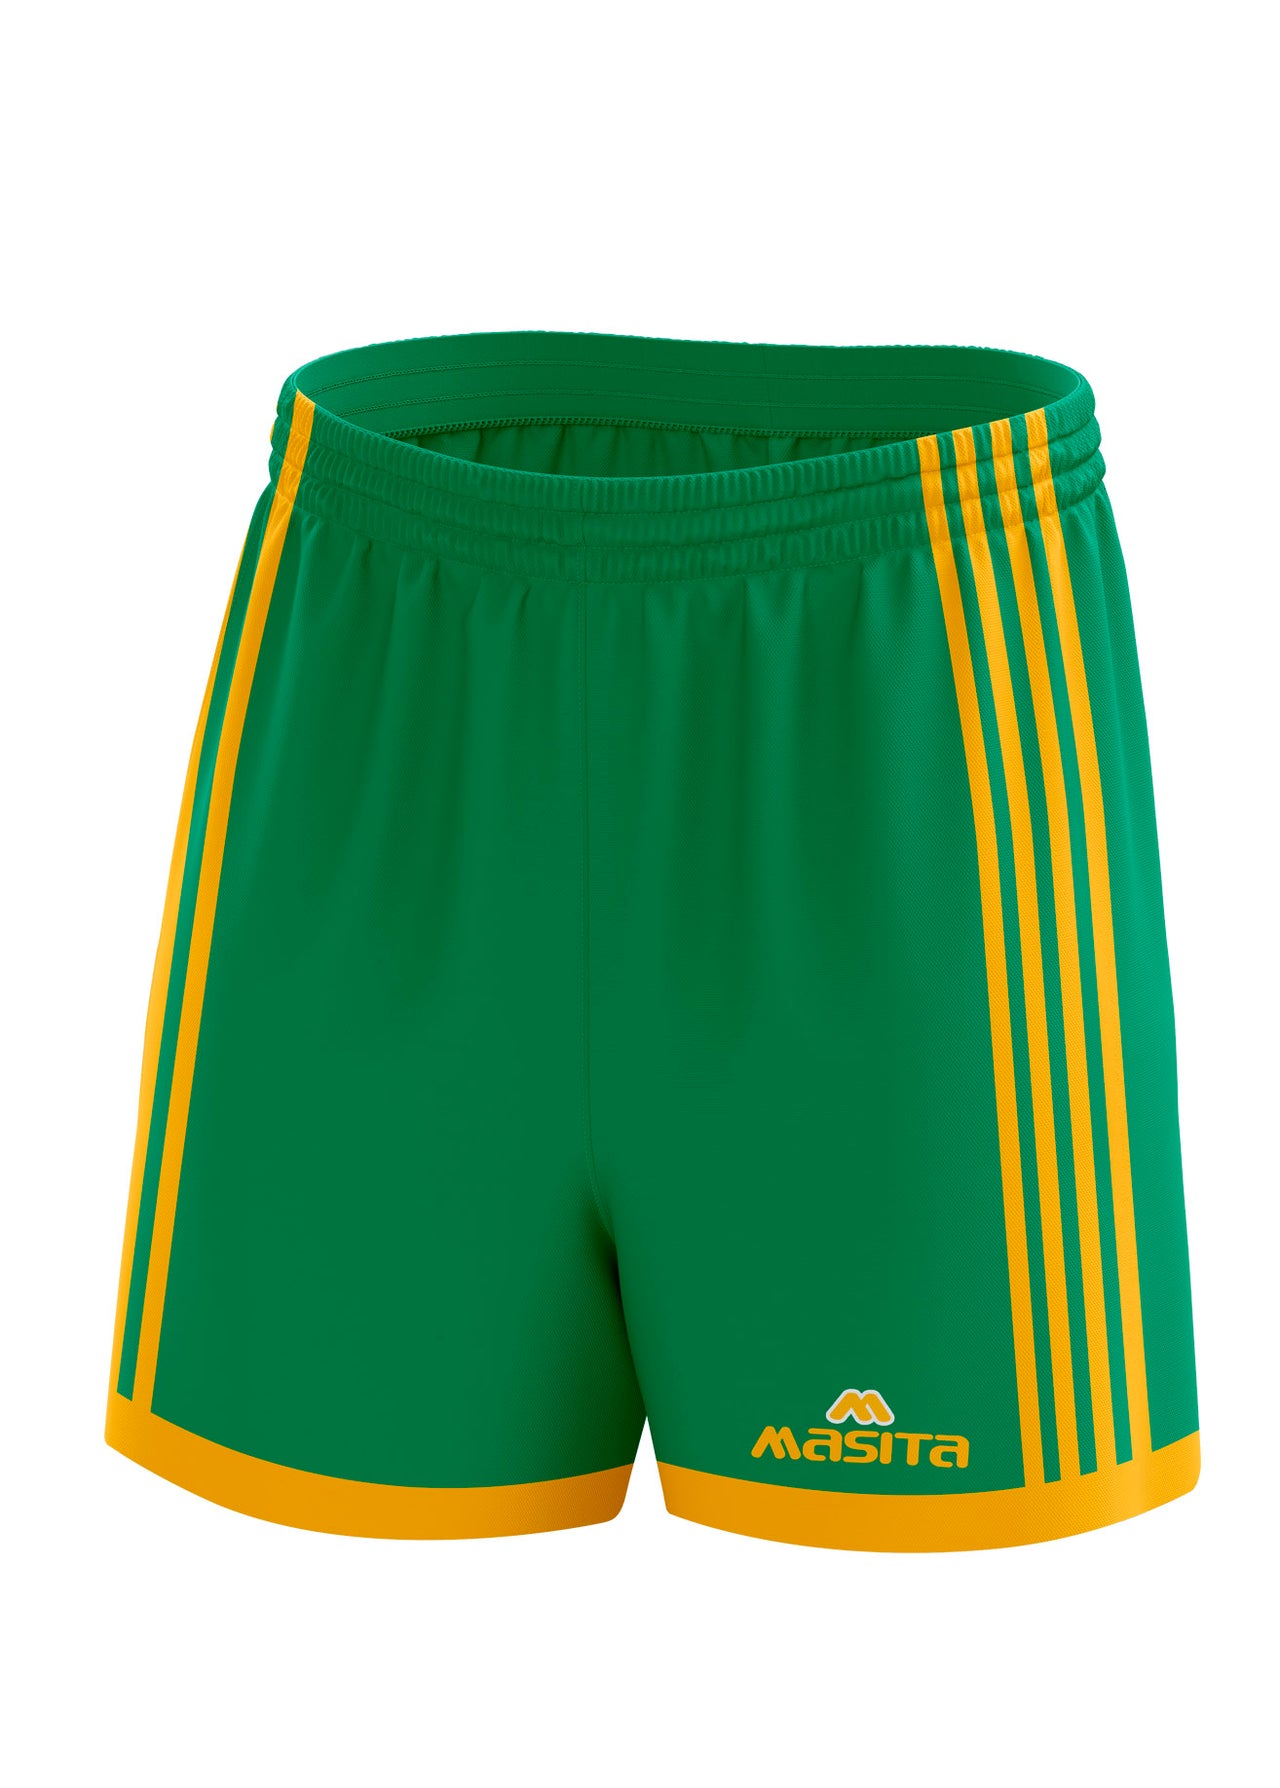 Solo Gaelic Shorts Green/Amber Adult